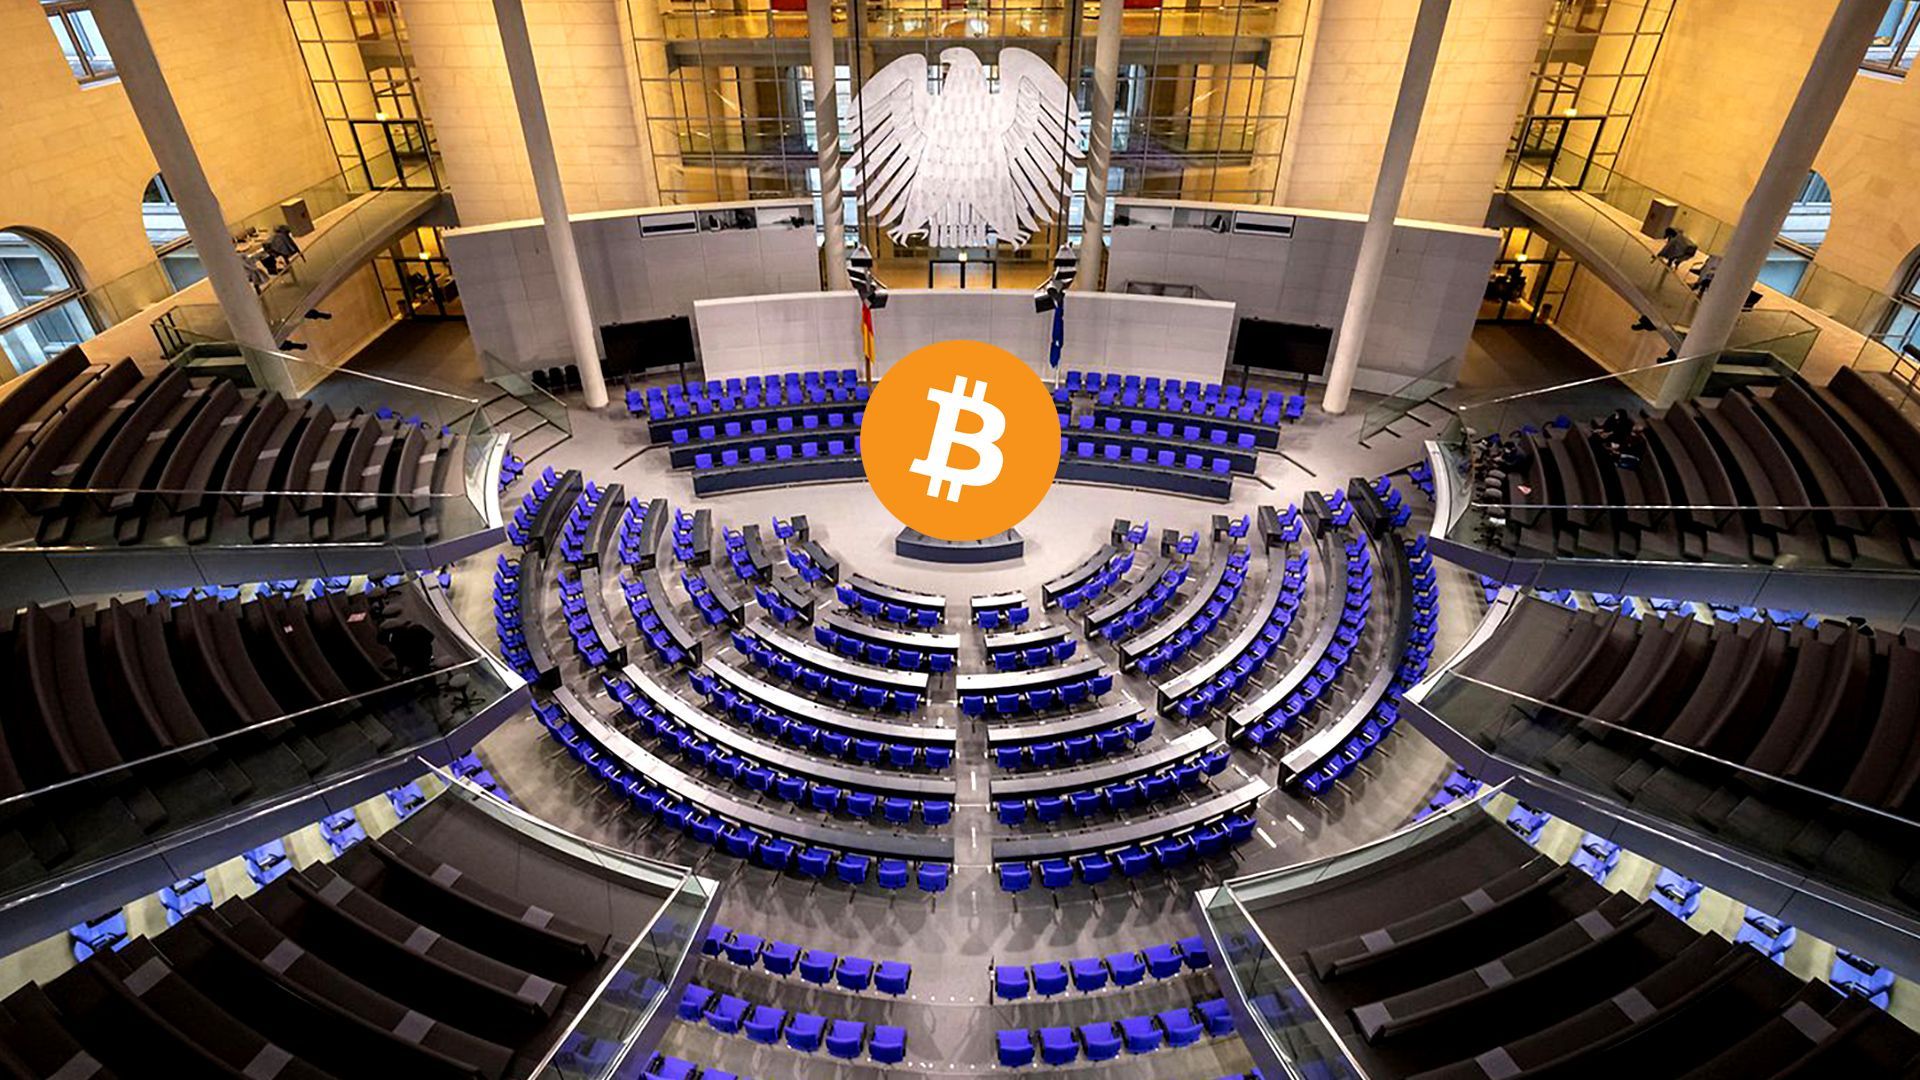 German Bundestag viwed from above witgh Bitcoin logo in the middle